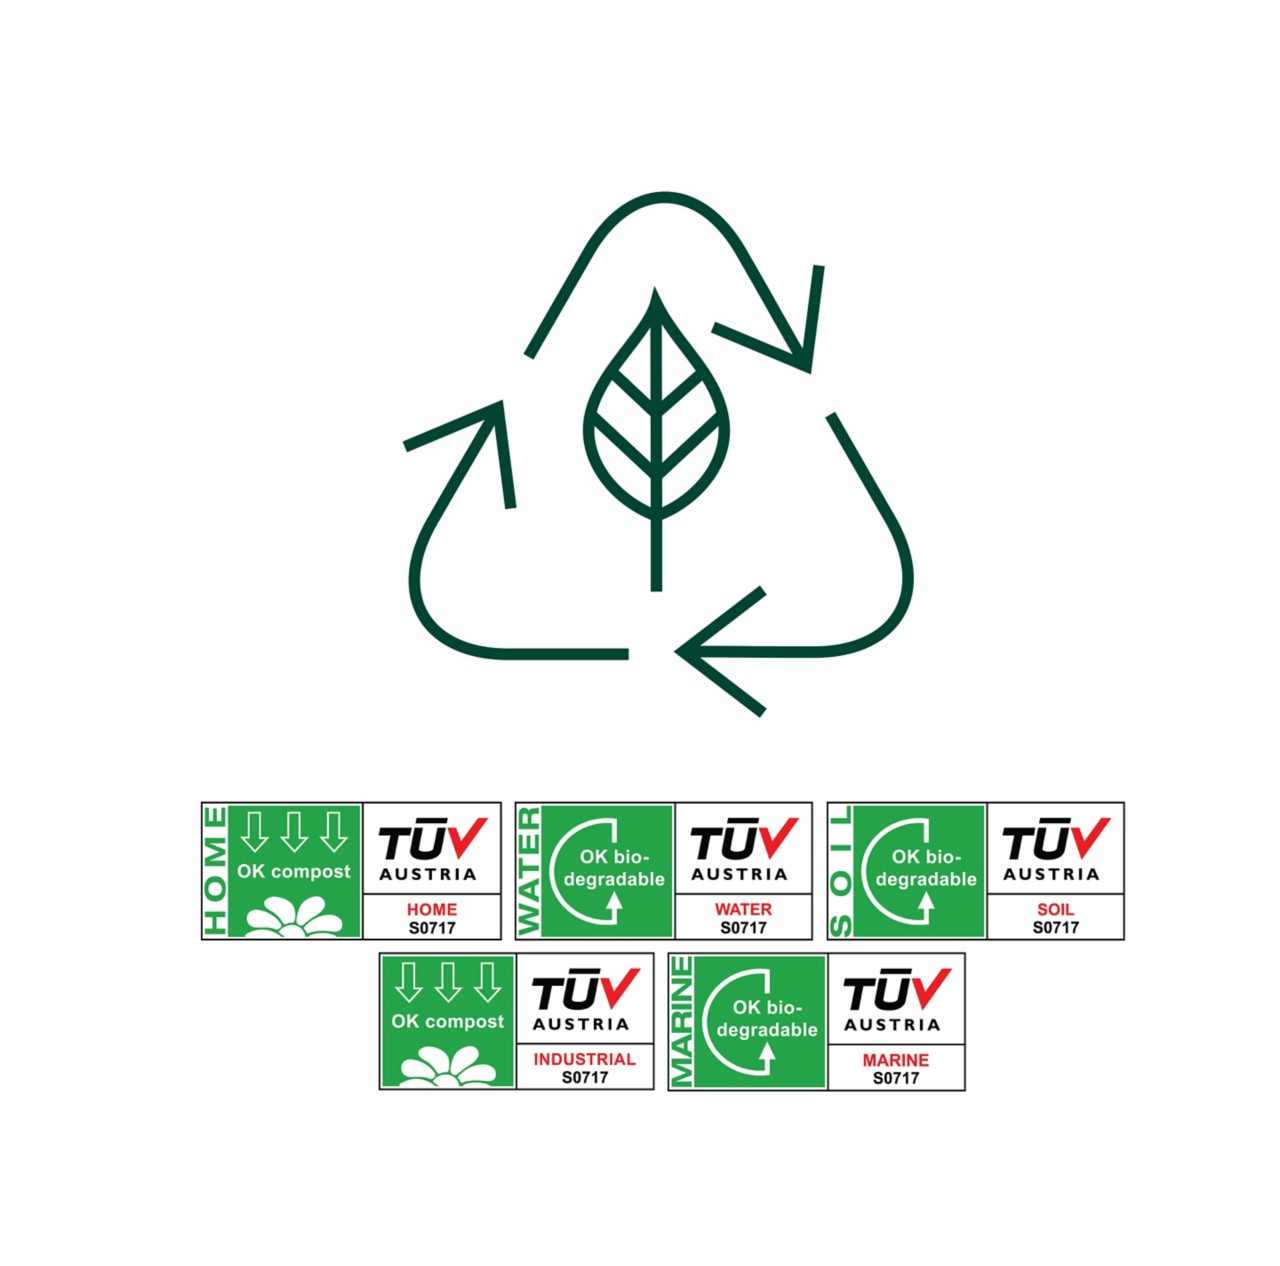 A recycling icon with TUV Austria certification logos. 